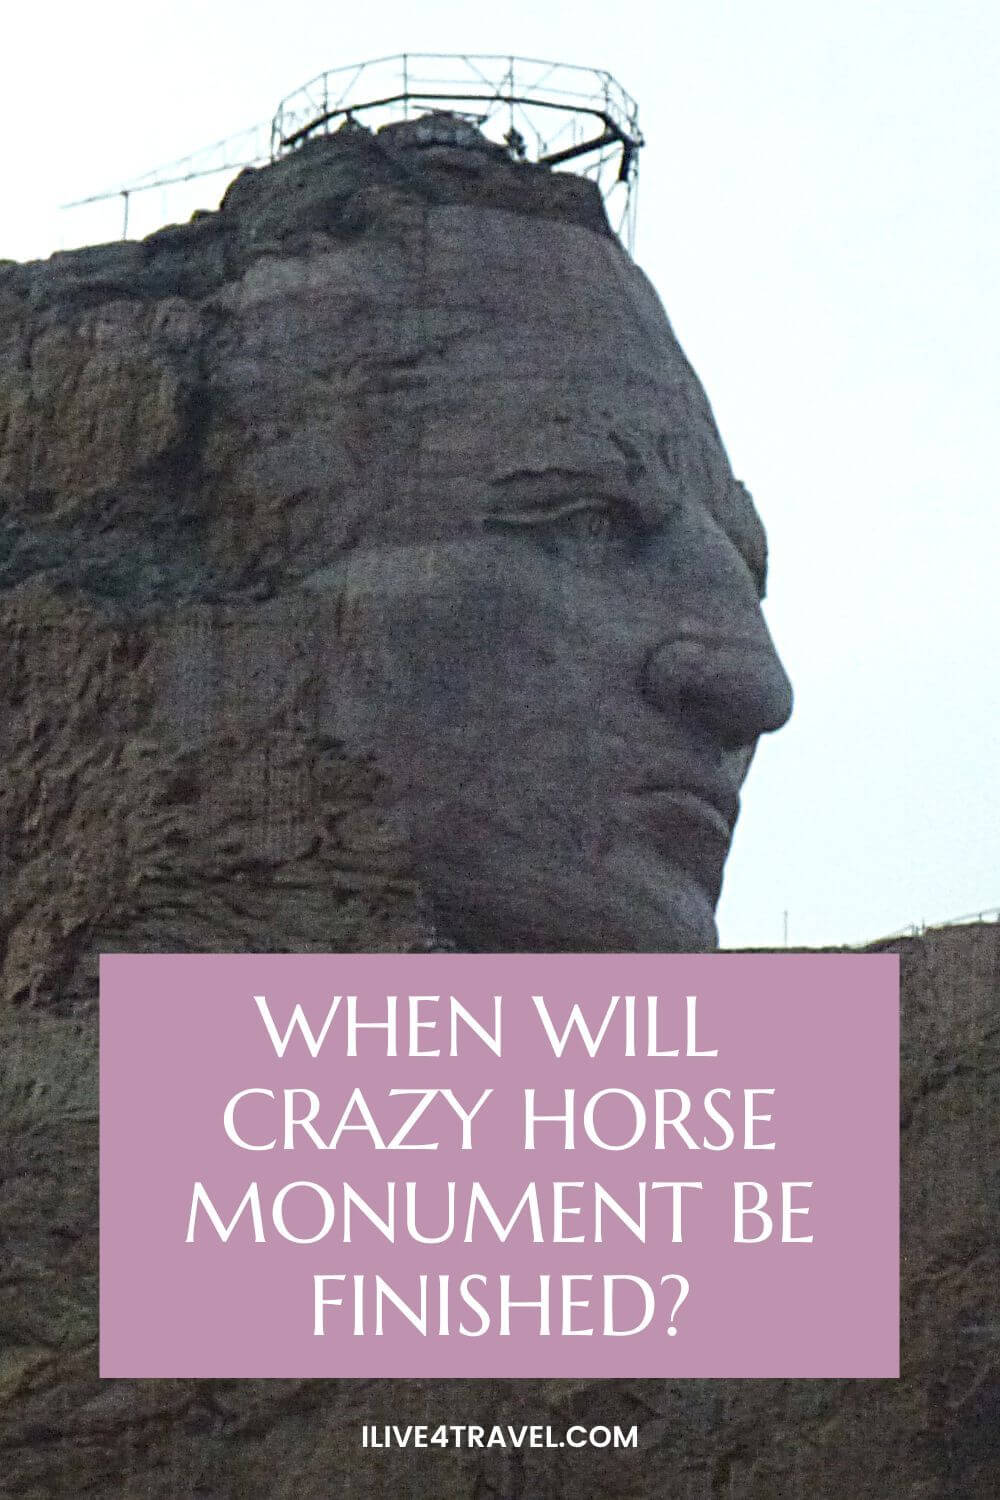 a pin created by i live for travel about when will Crazy Horse Monument be finished.  You can see a head profile carved out of rock with scaffolding on the top of the head